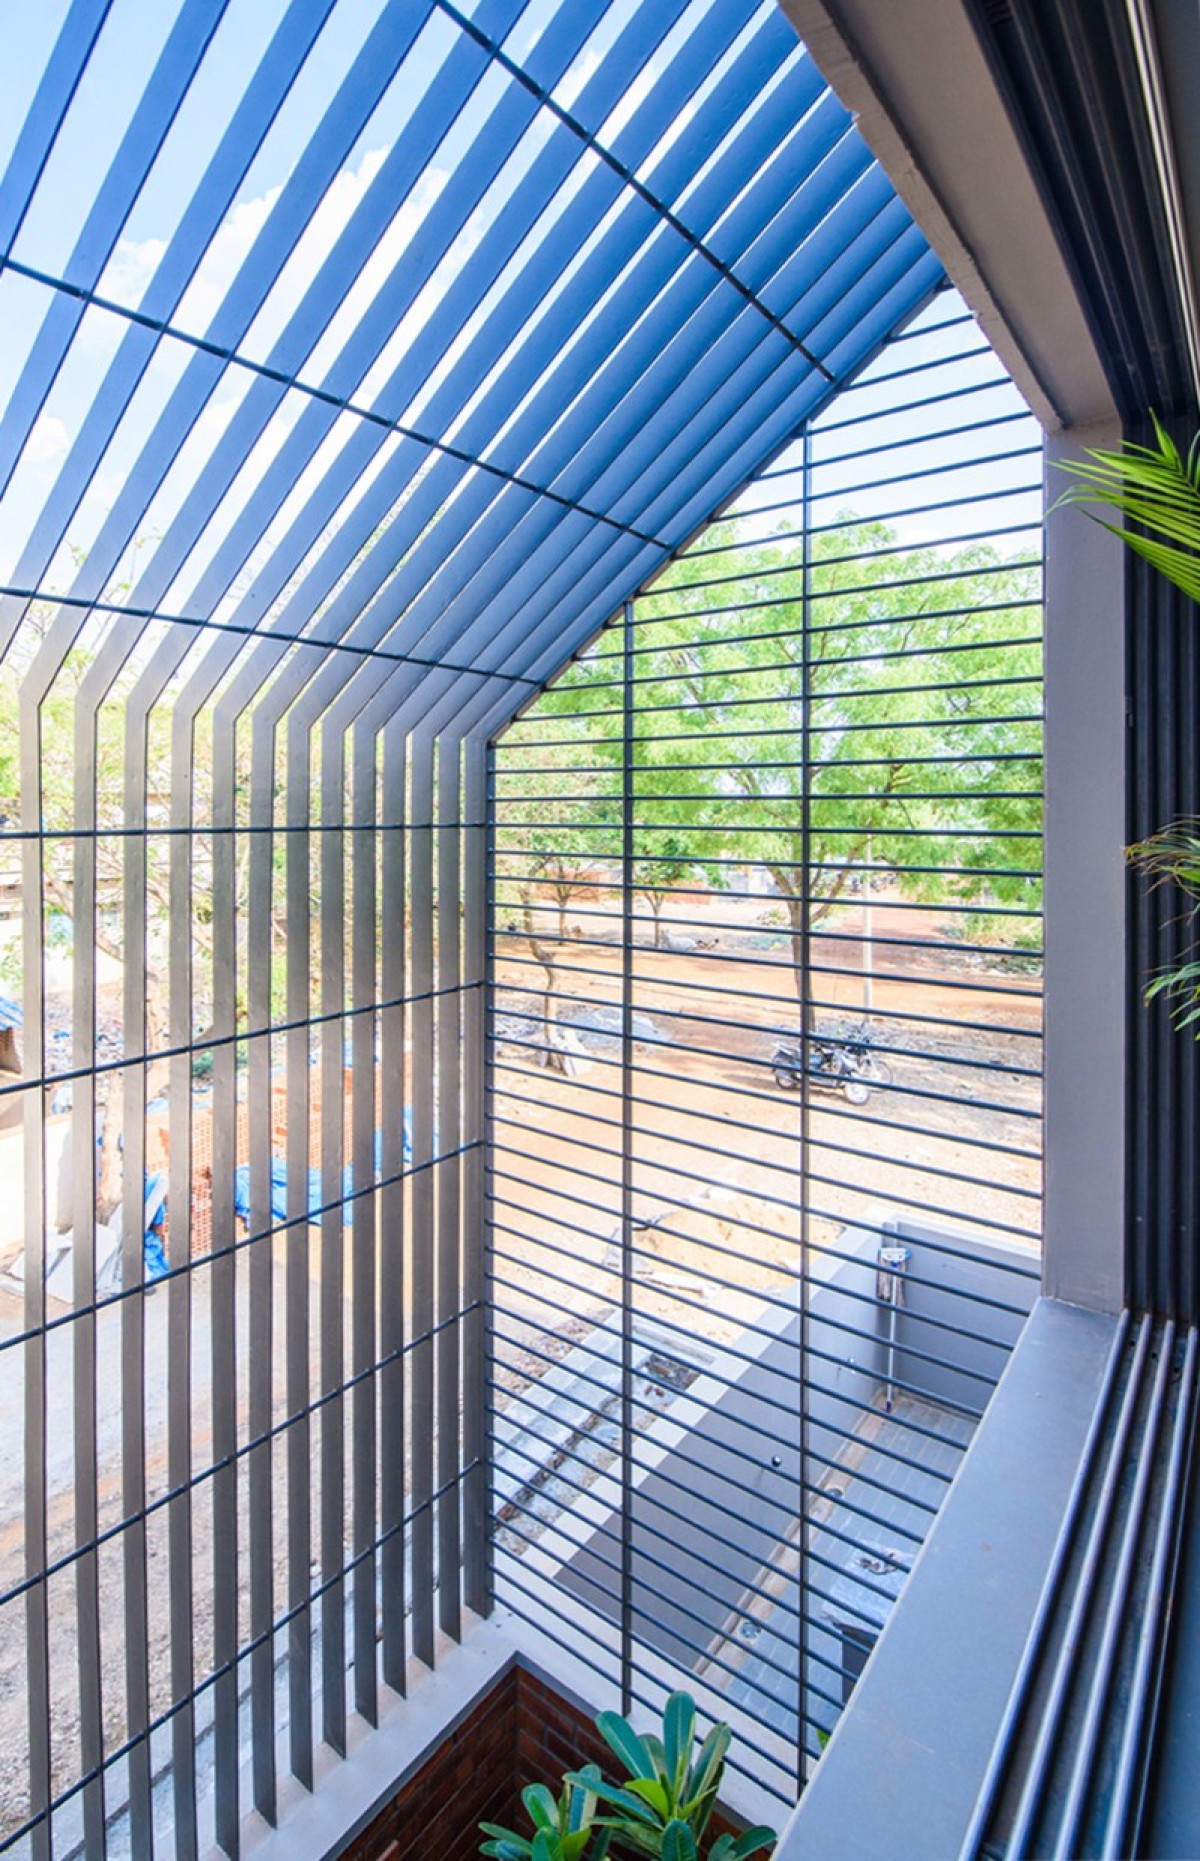 Landscape Courtyard view from 1st floor of Corner Brick House by Jacob + Rathodi Architects